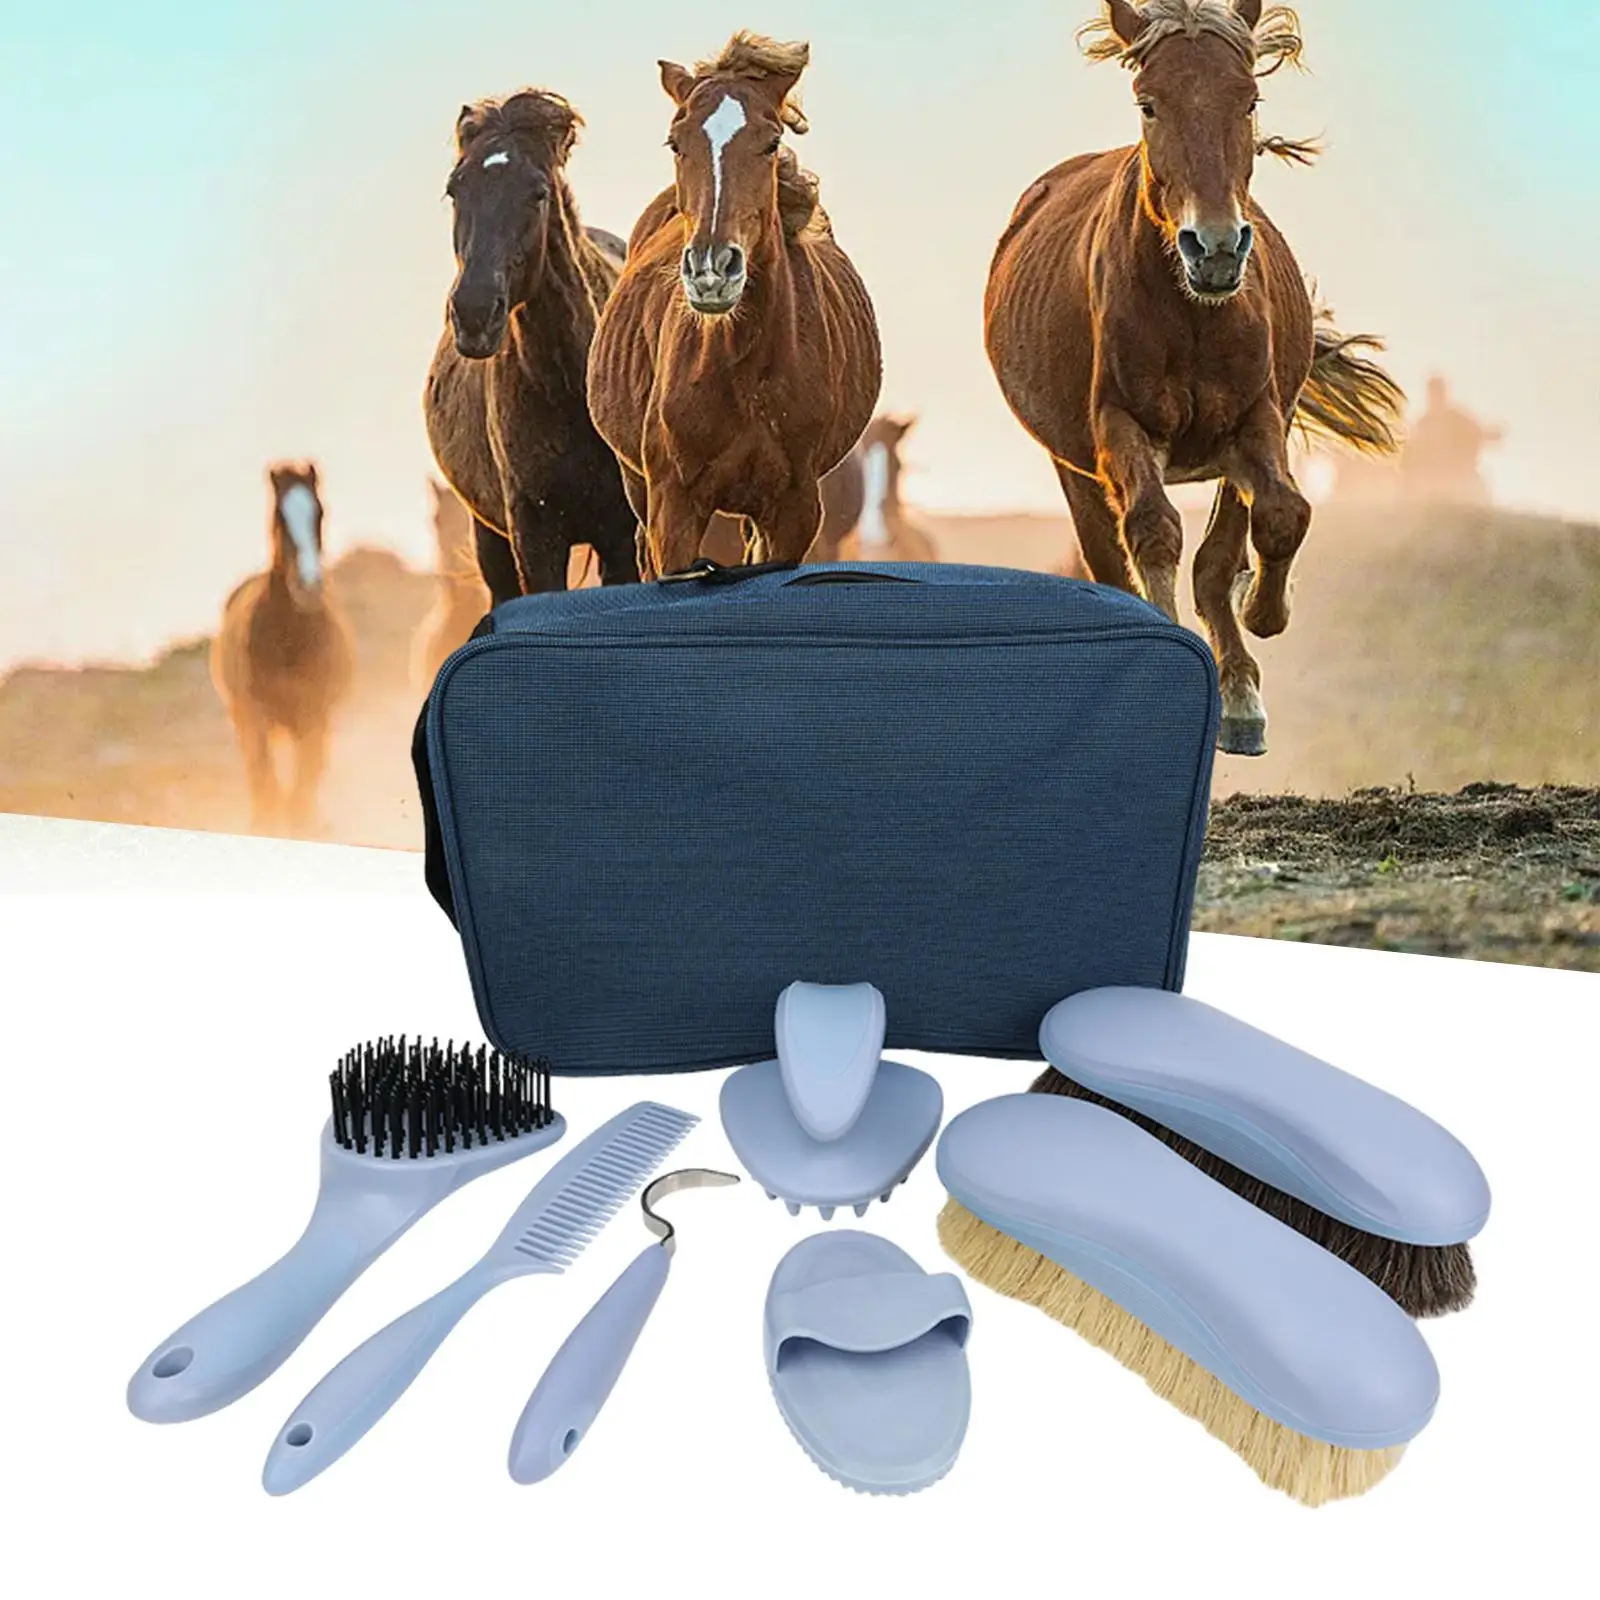 8x-horse-bathing-supplies-horse-grooming-care-kit-for-adults-horse-riders